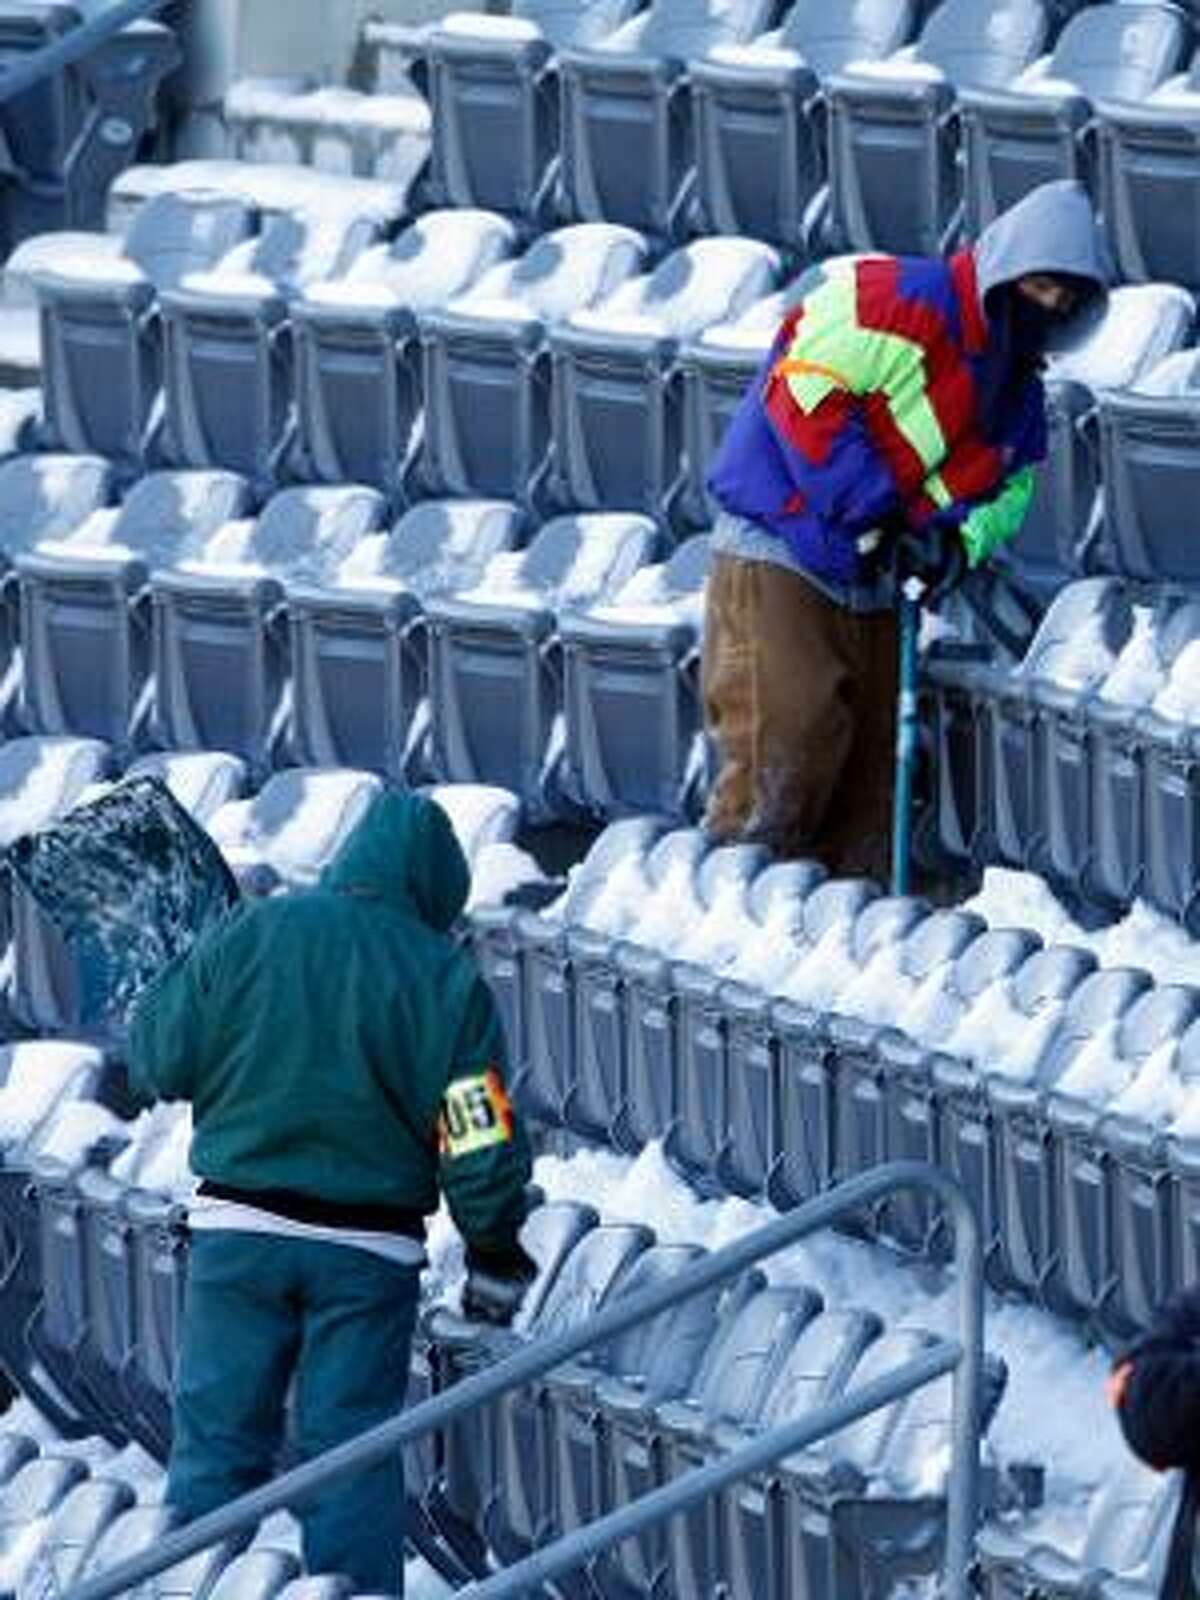 AP Work crews remove snow from the stands of Lincoln Financial Field, home of the Philadelphia Eagles, in Philadelphia on Monday. A winter storm resulted in the postponement of the Minnesota Vikings-Eagles game from Sunday night to Tuesday night.